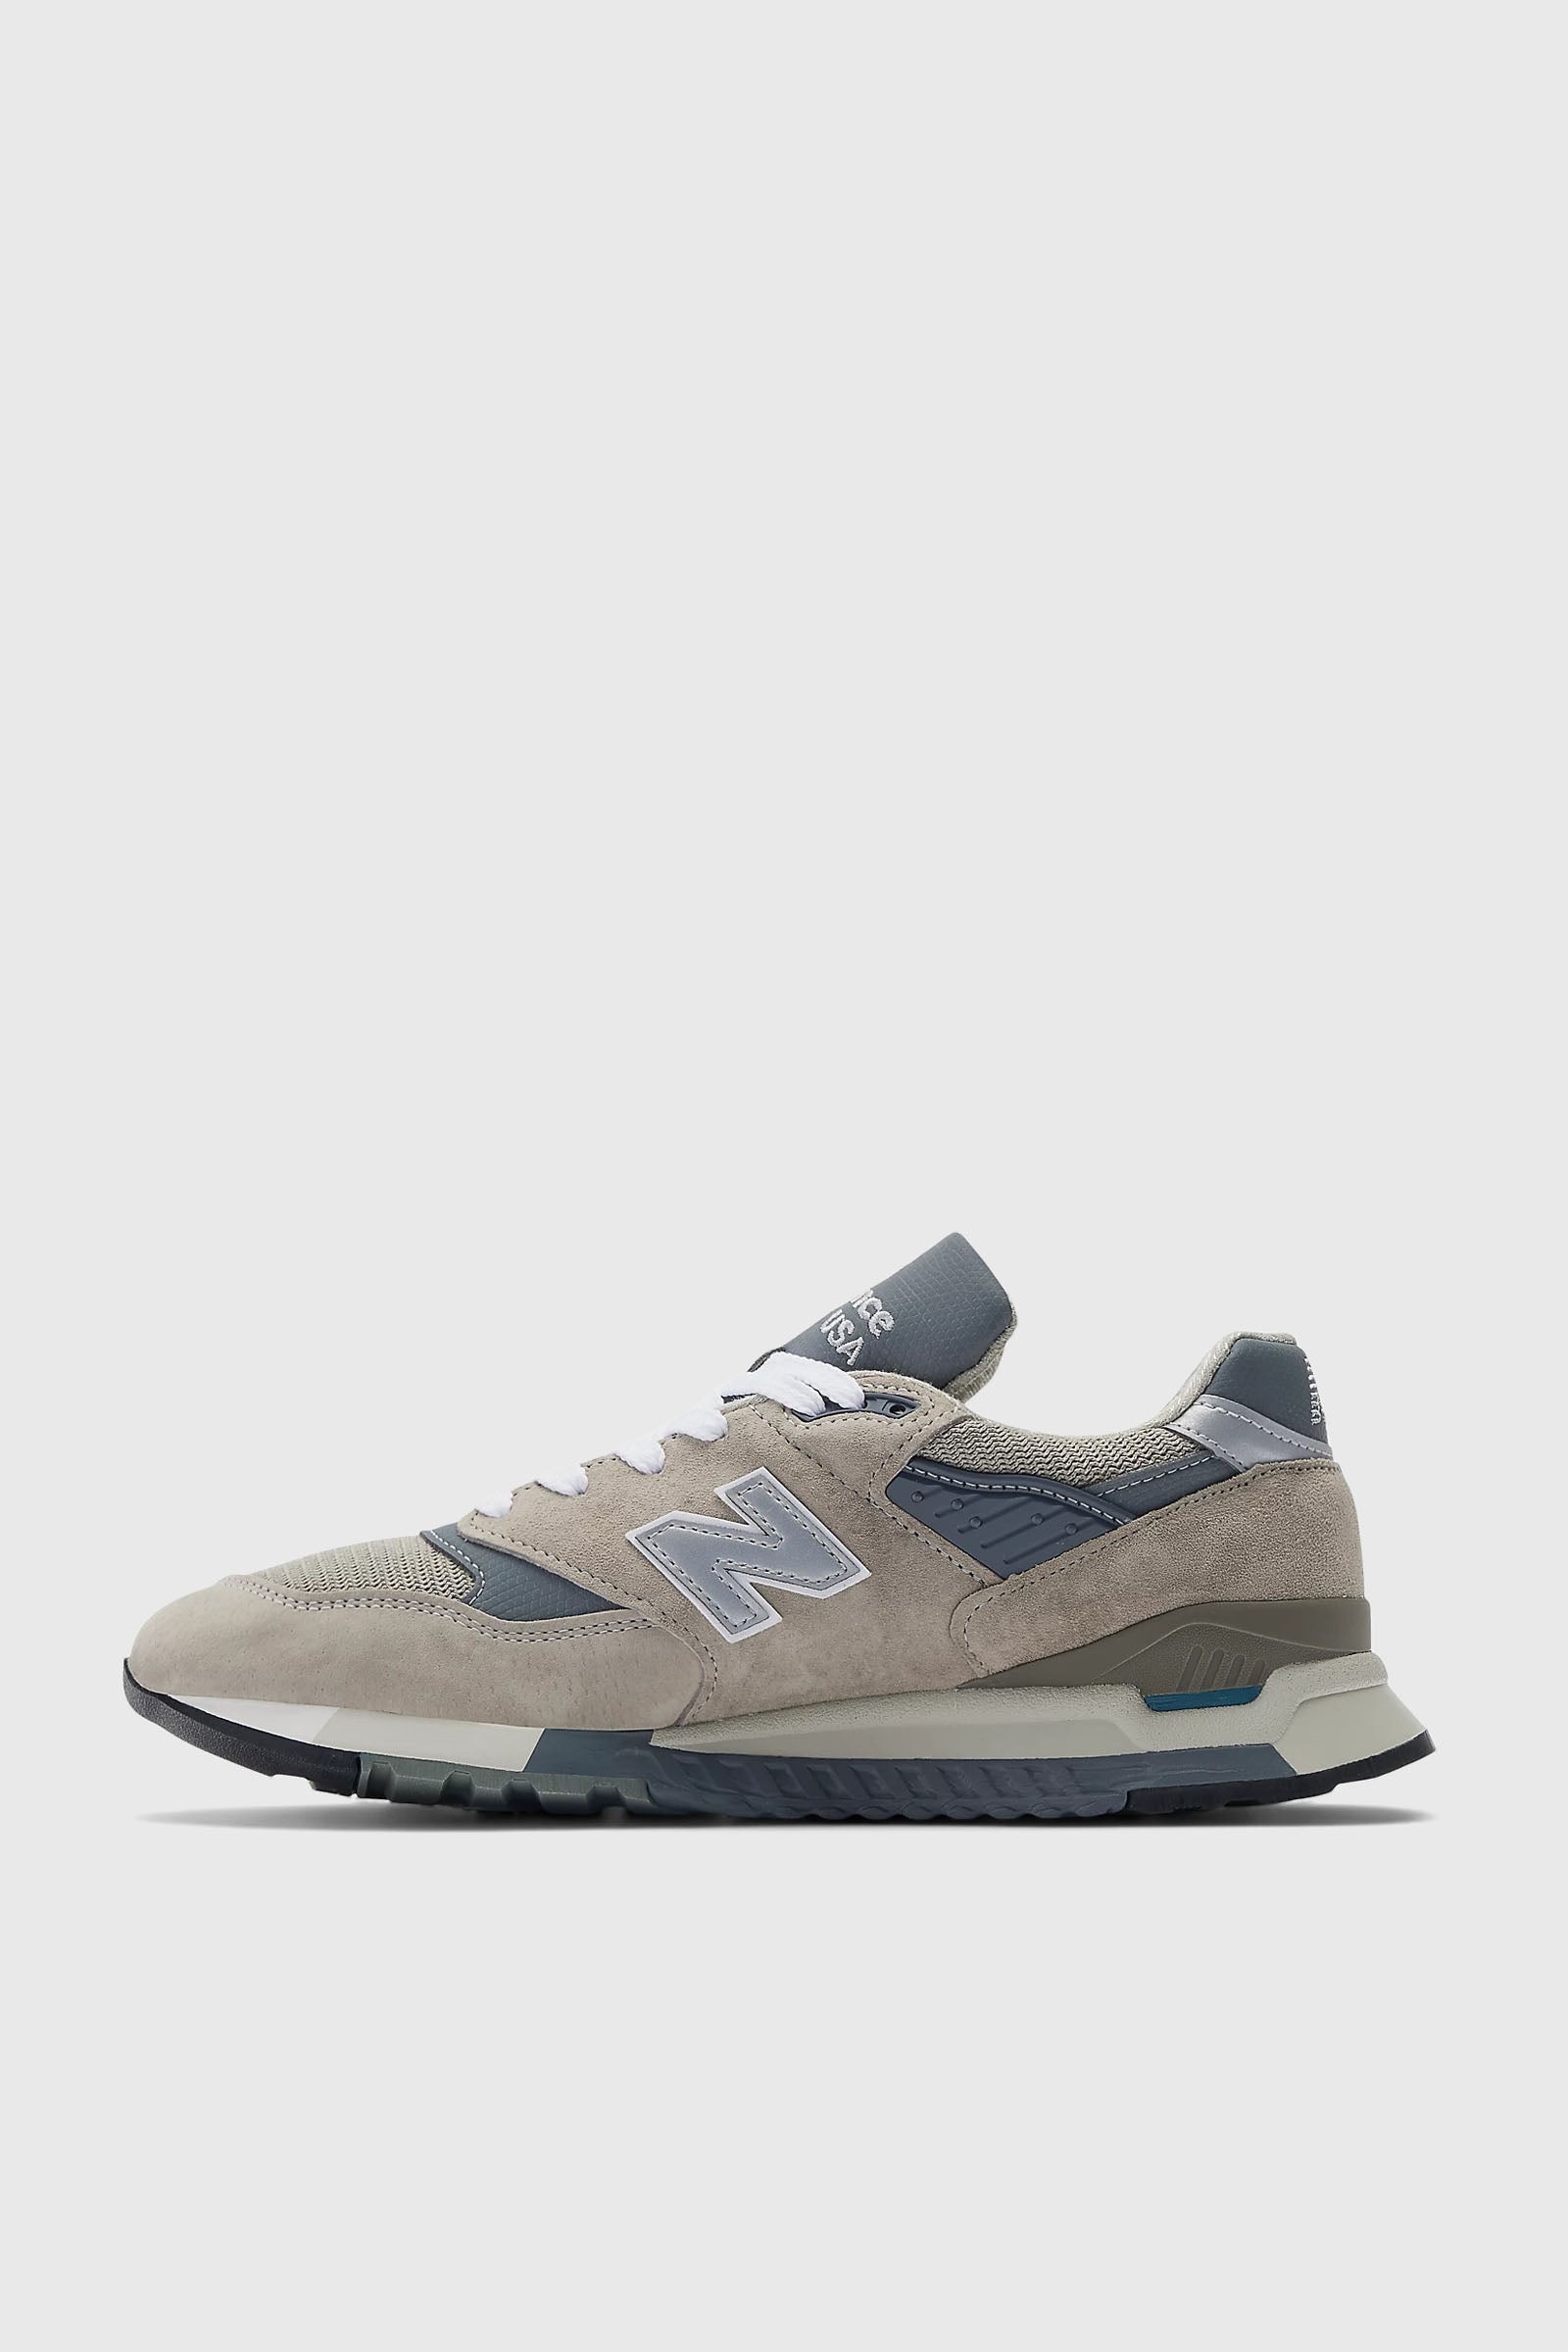 New Balance Sneakers Made in USA 998 Synthetic Grey - 8